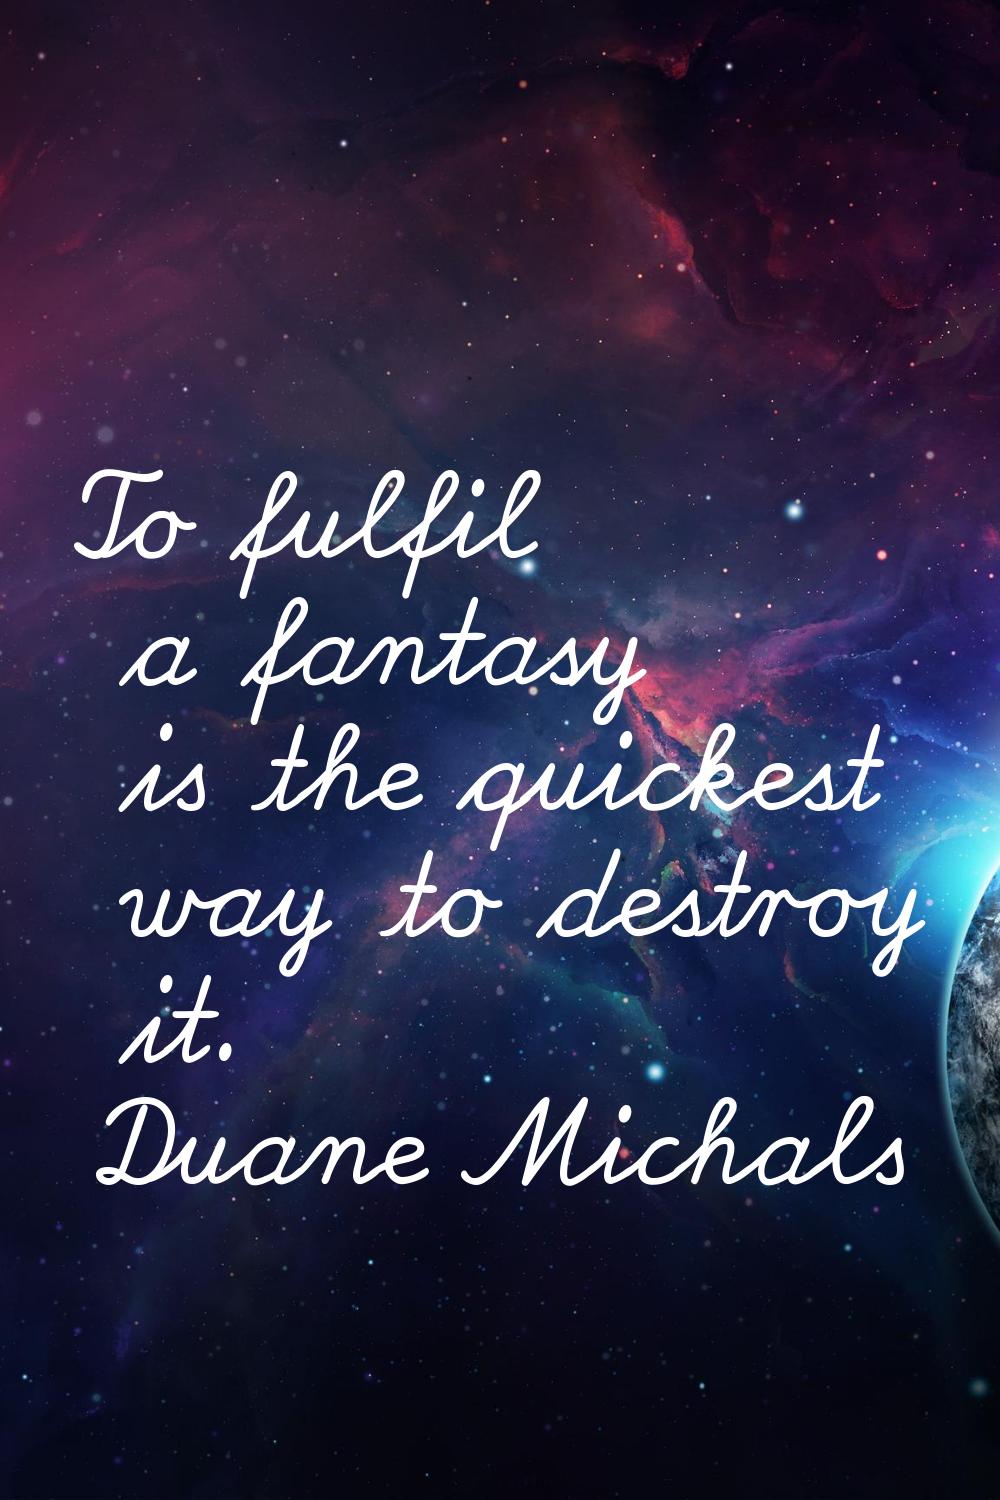 To fulfil a fantasy is the quickest way to destroy it.